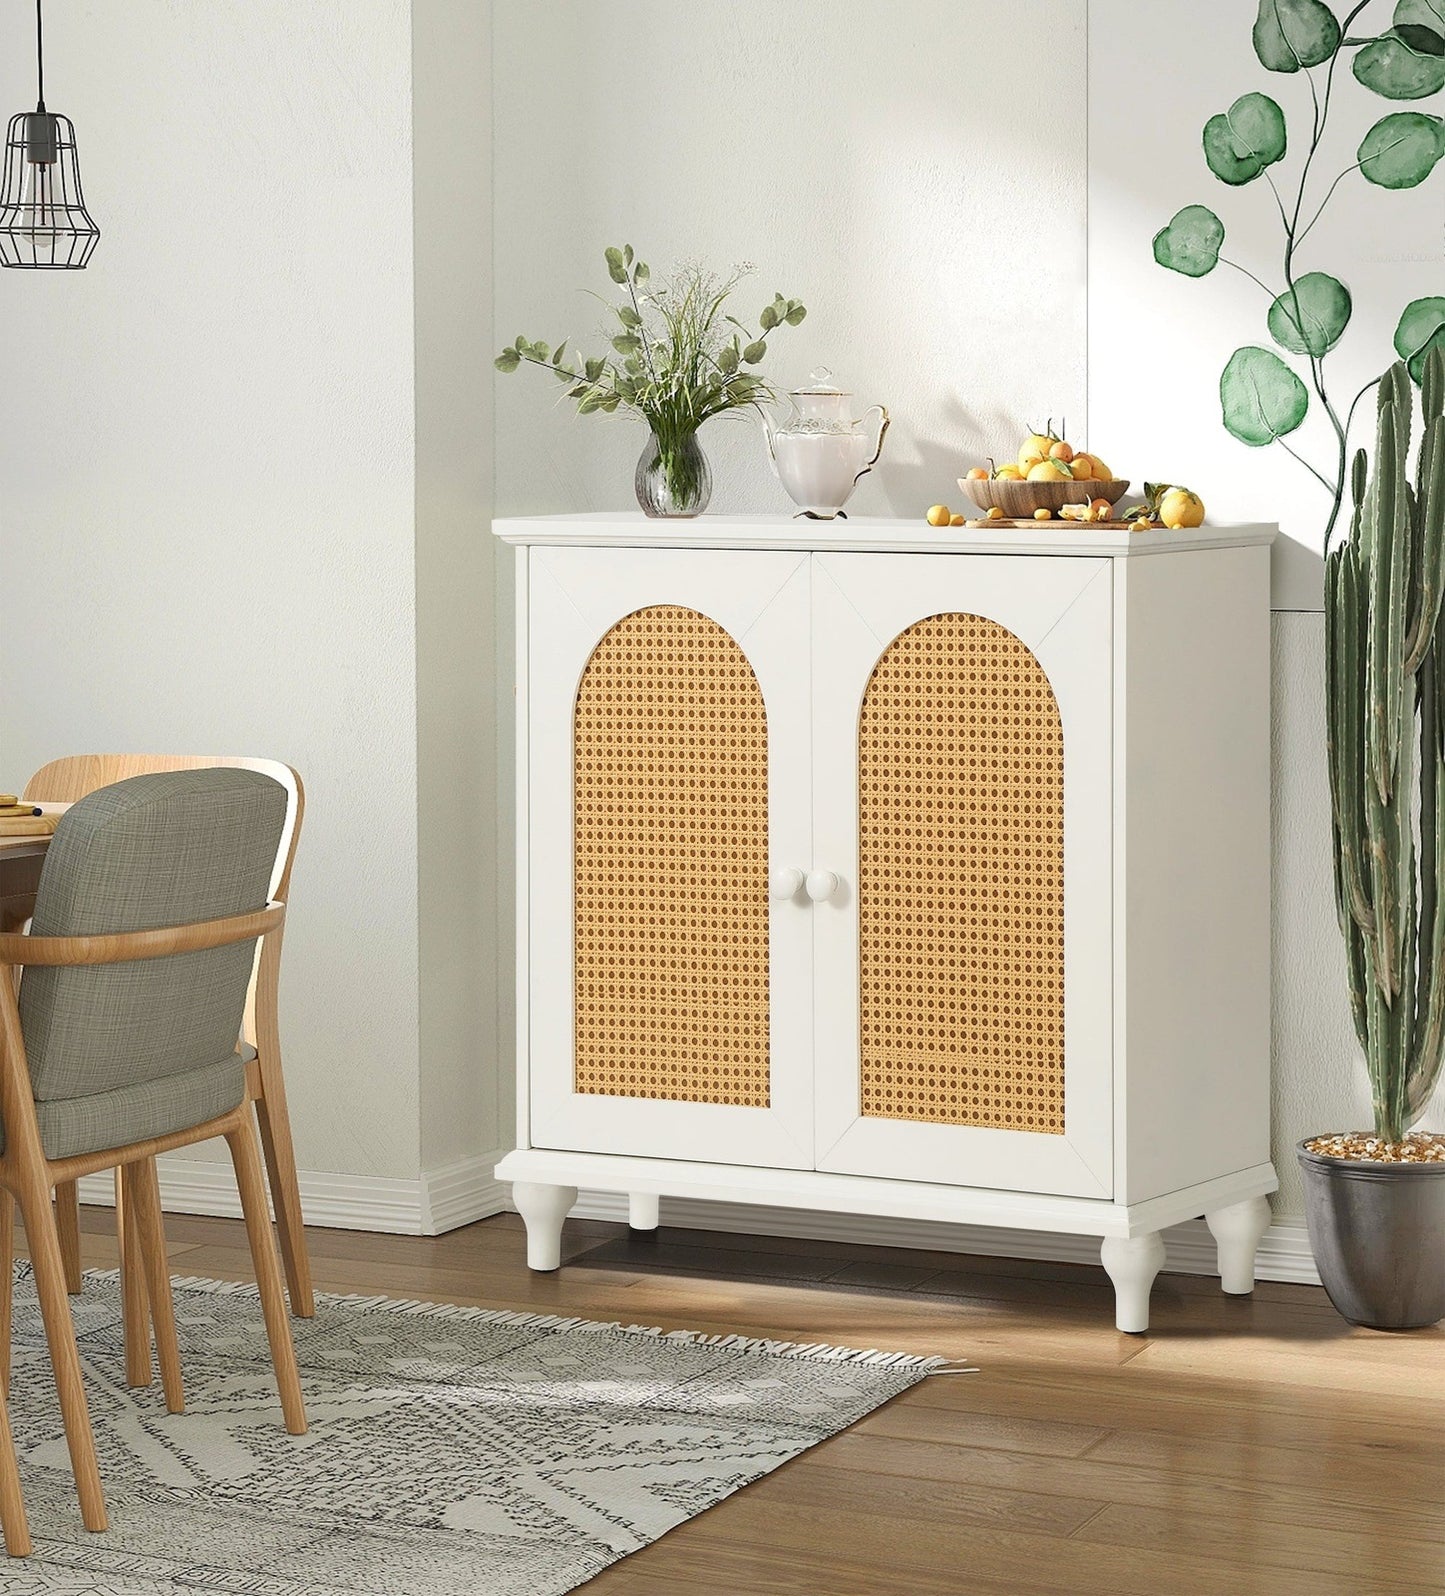 Zrun 2-Door Wooden Accent Cabinet with Rattan Fronts - Antique White